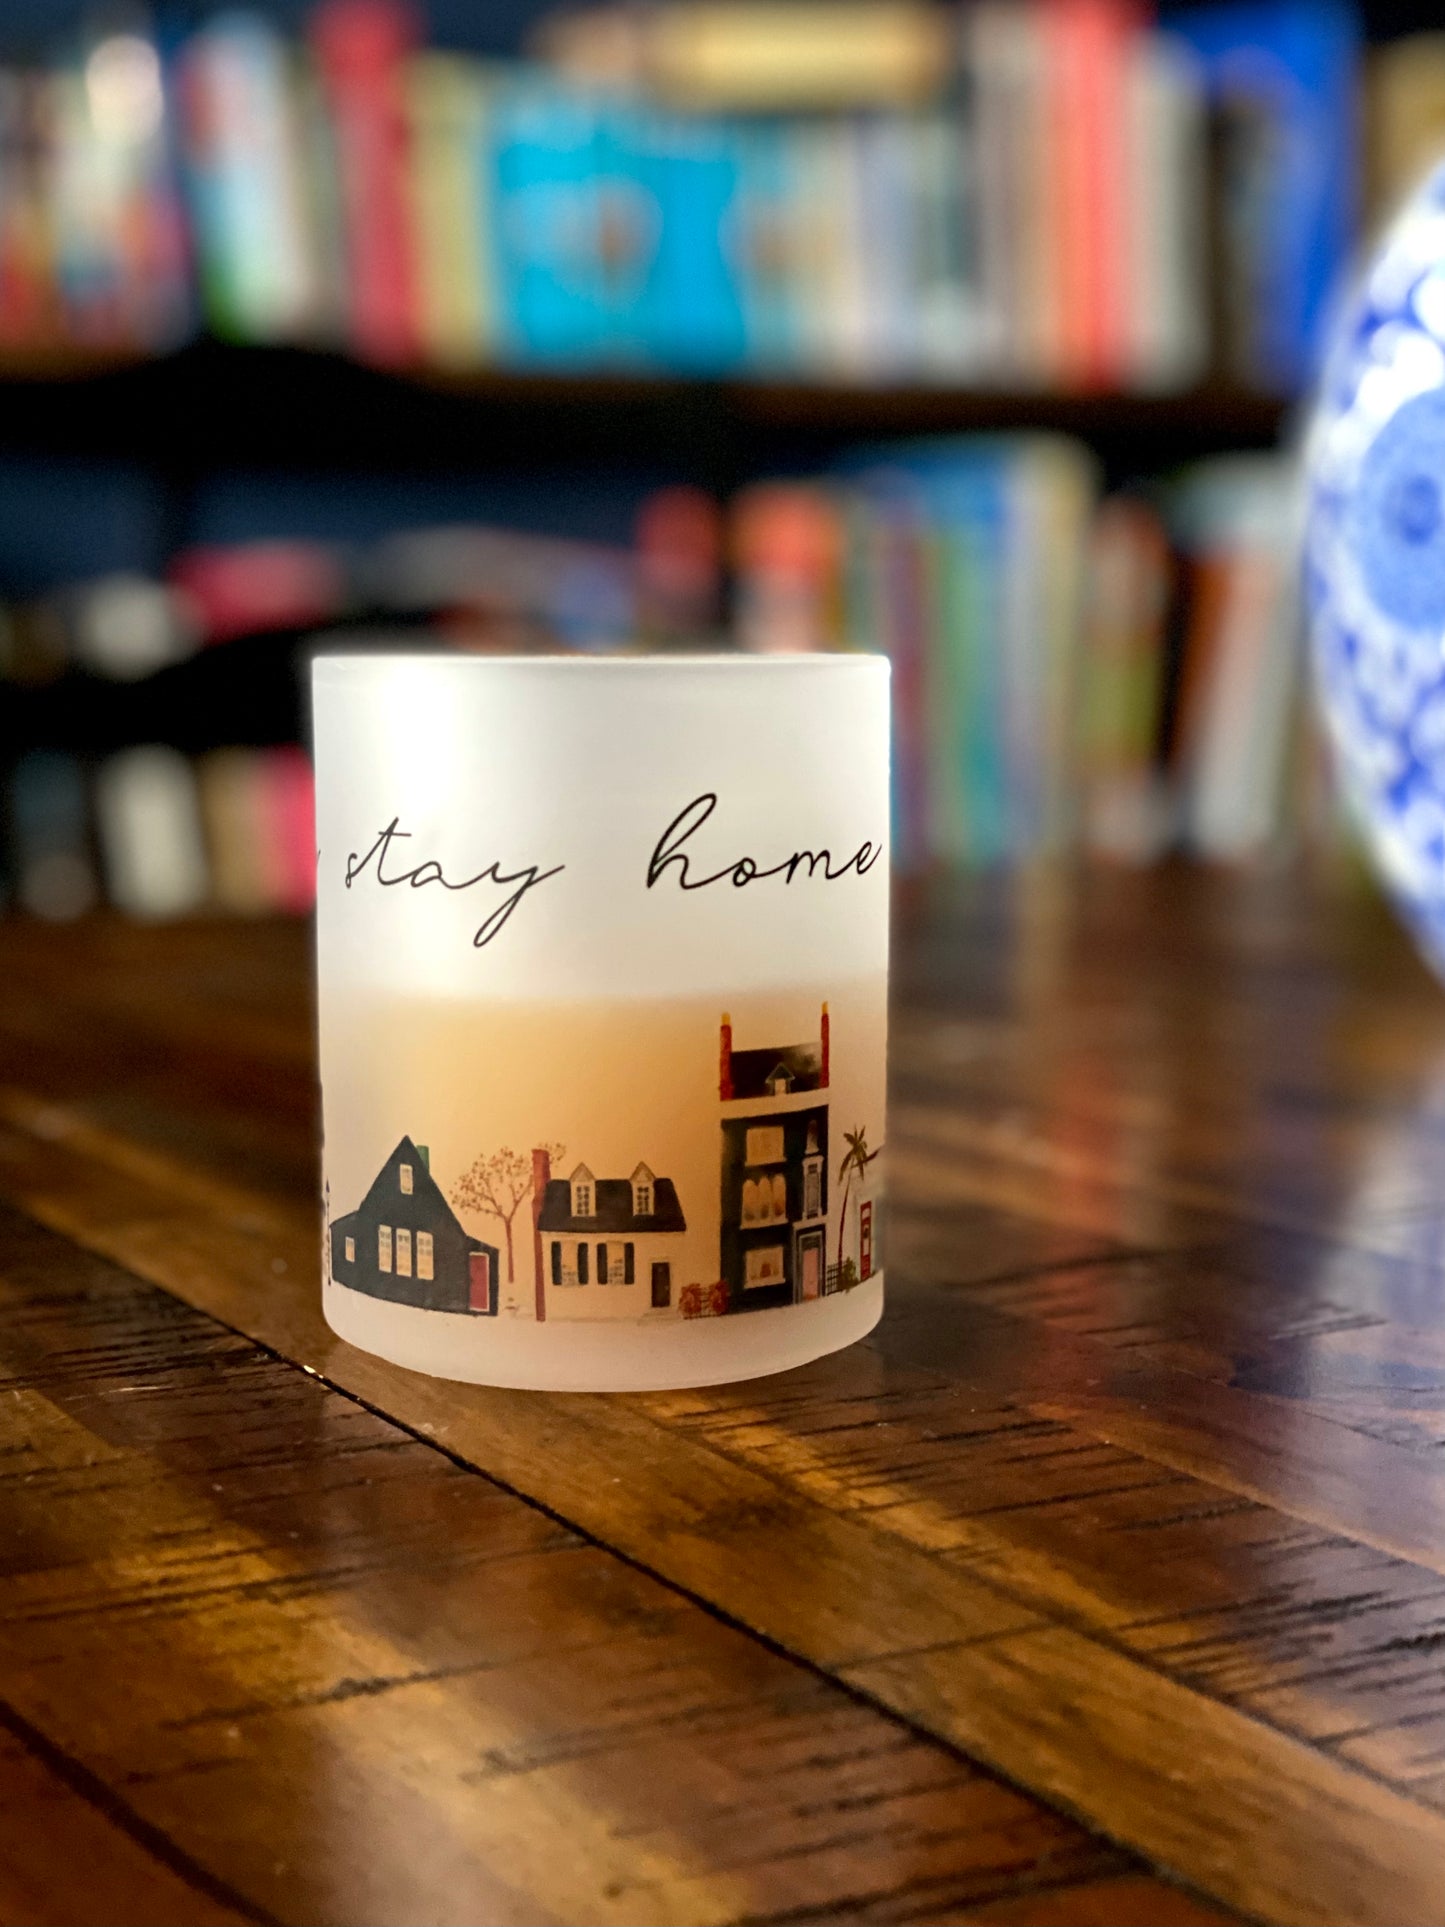 “Let’s Stay Home” Frosted Mug 16oz